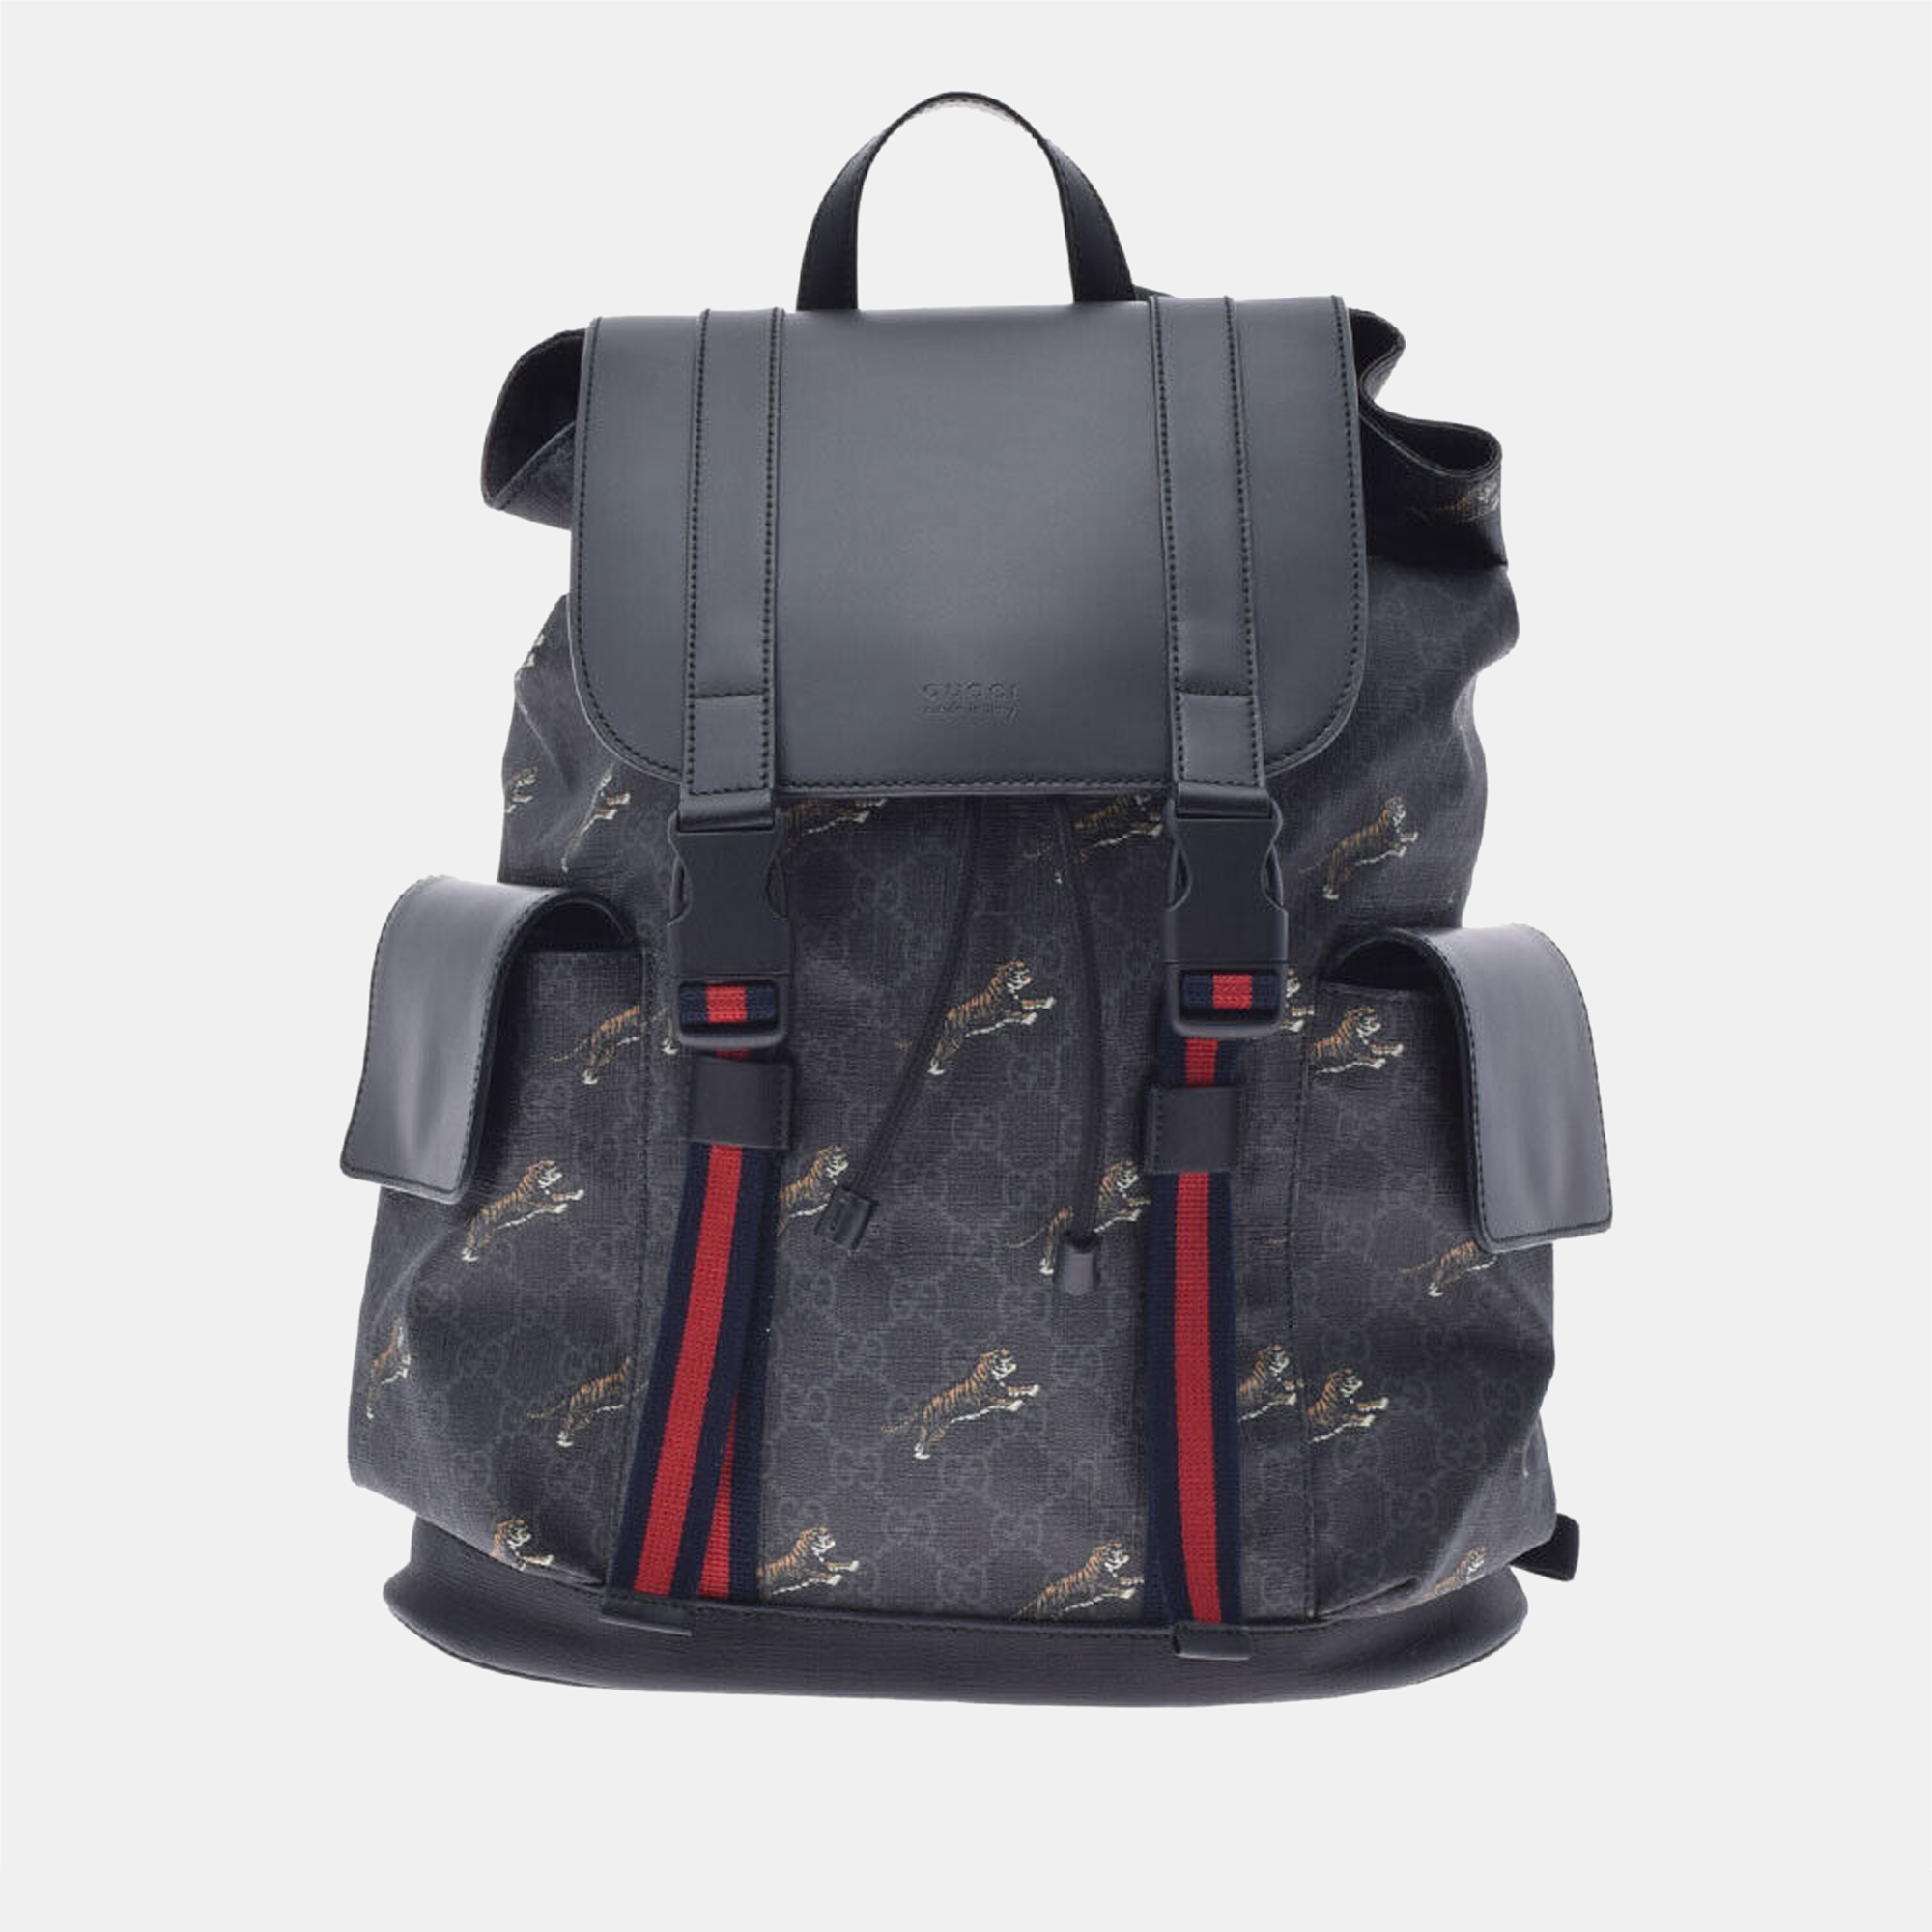 Pre-owned Gucci Black Canvas Leather Gg Supreme Flying Tiger Backpack